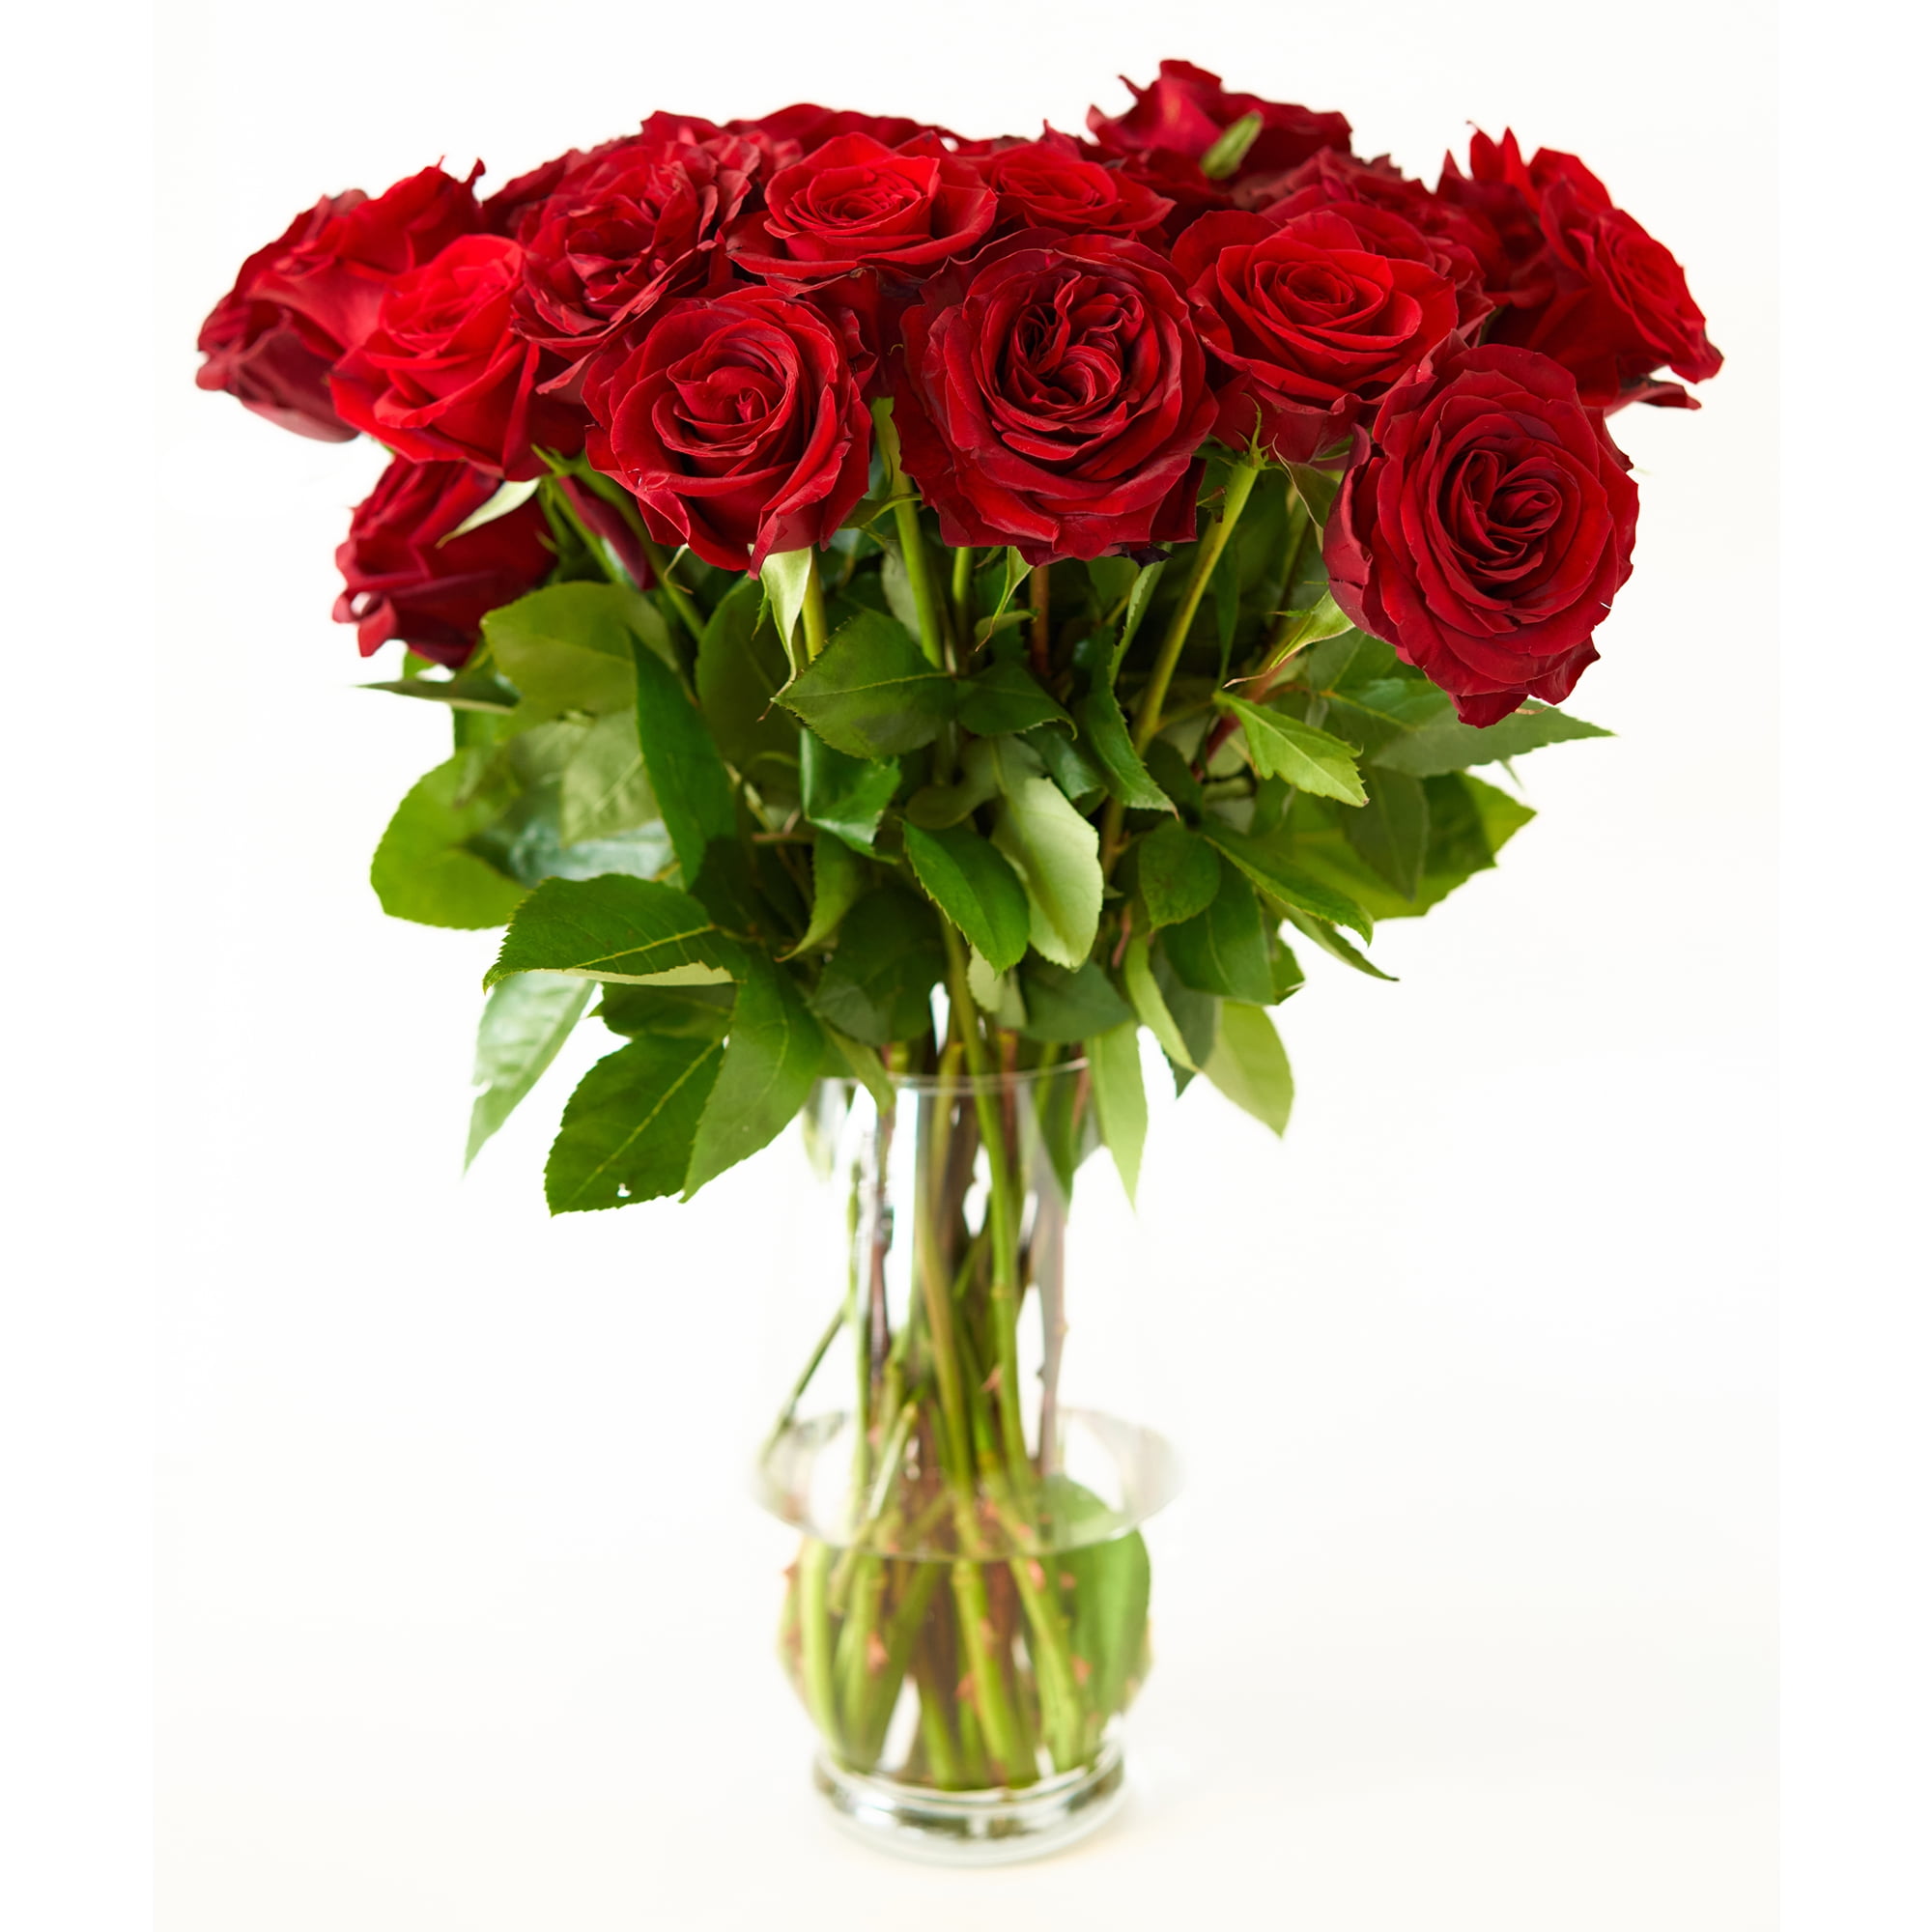 Red Roses Flower Bouquet - 12 Red Roses Long Stem - 1 Dozen Roses - Beautiful Red Roses Delivery - Luxury &amp; Fresh Roses - Birthday &amp; Anniversary Roses (Any Occasion)